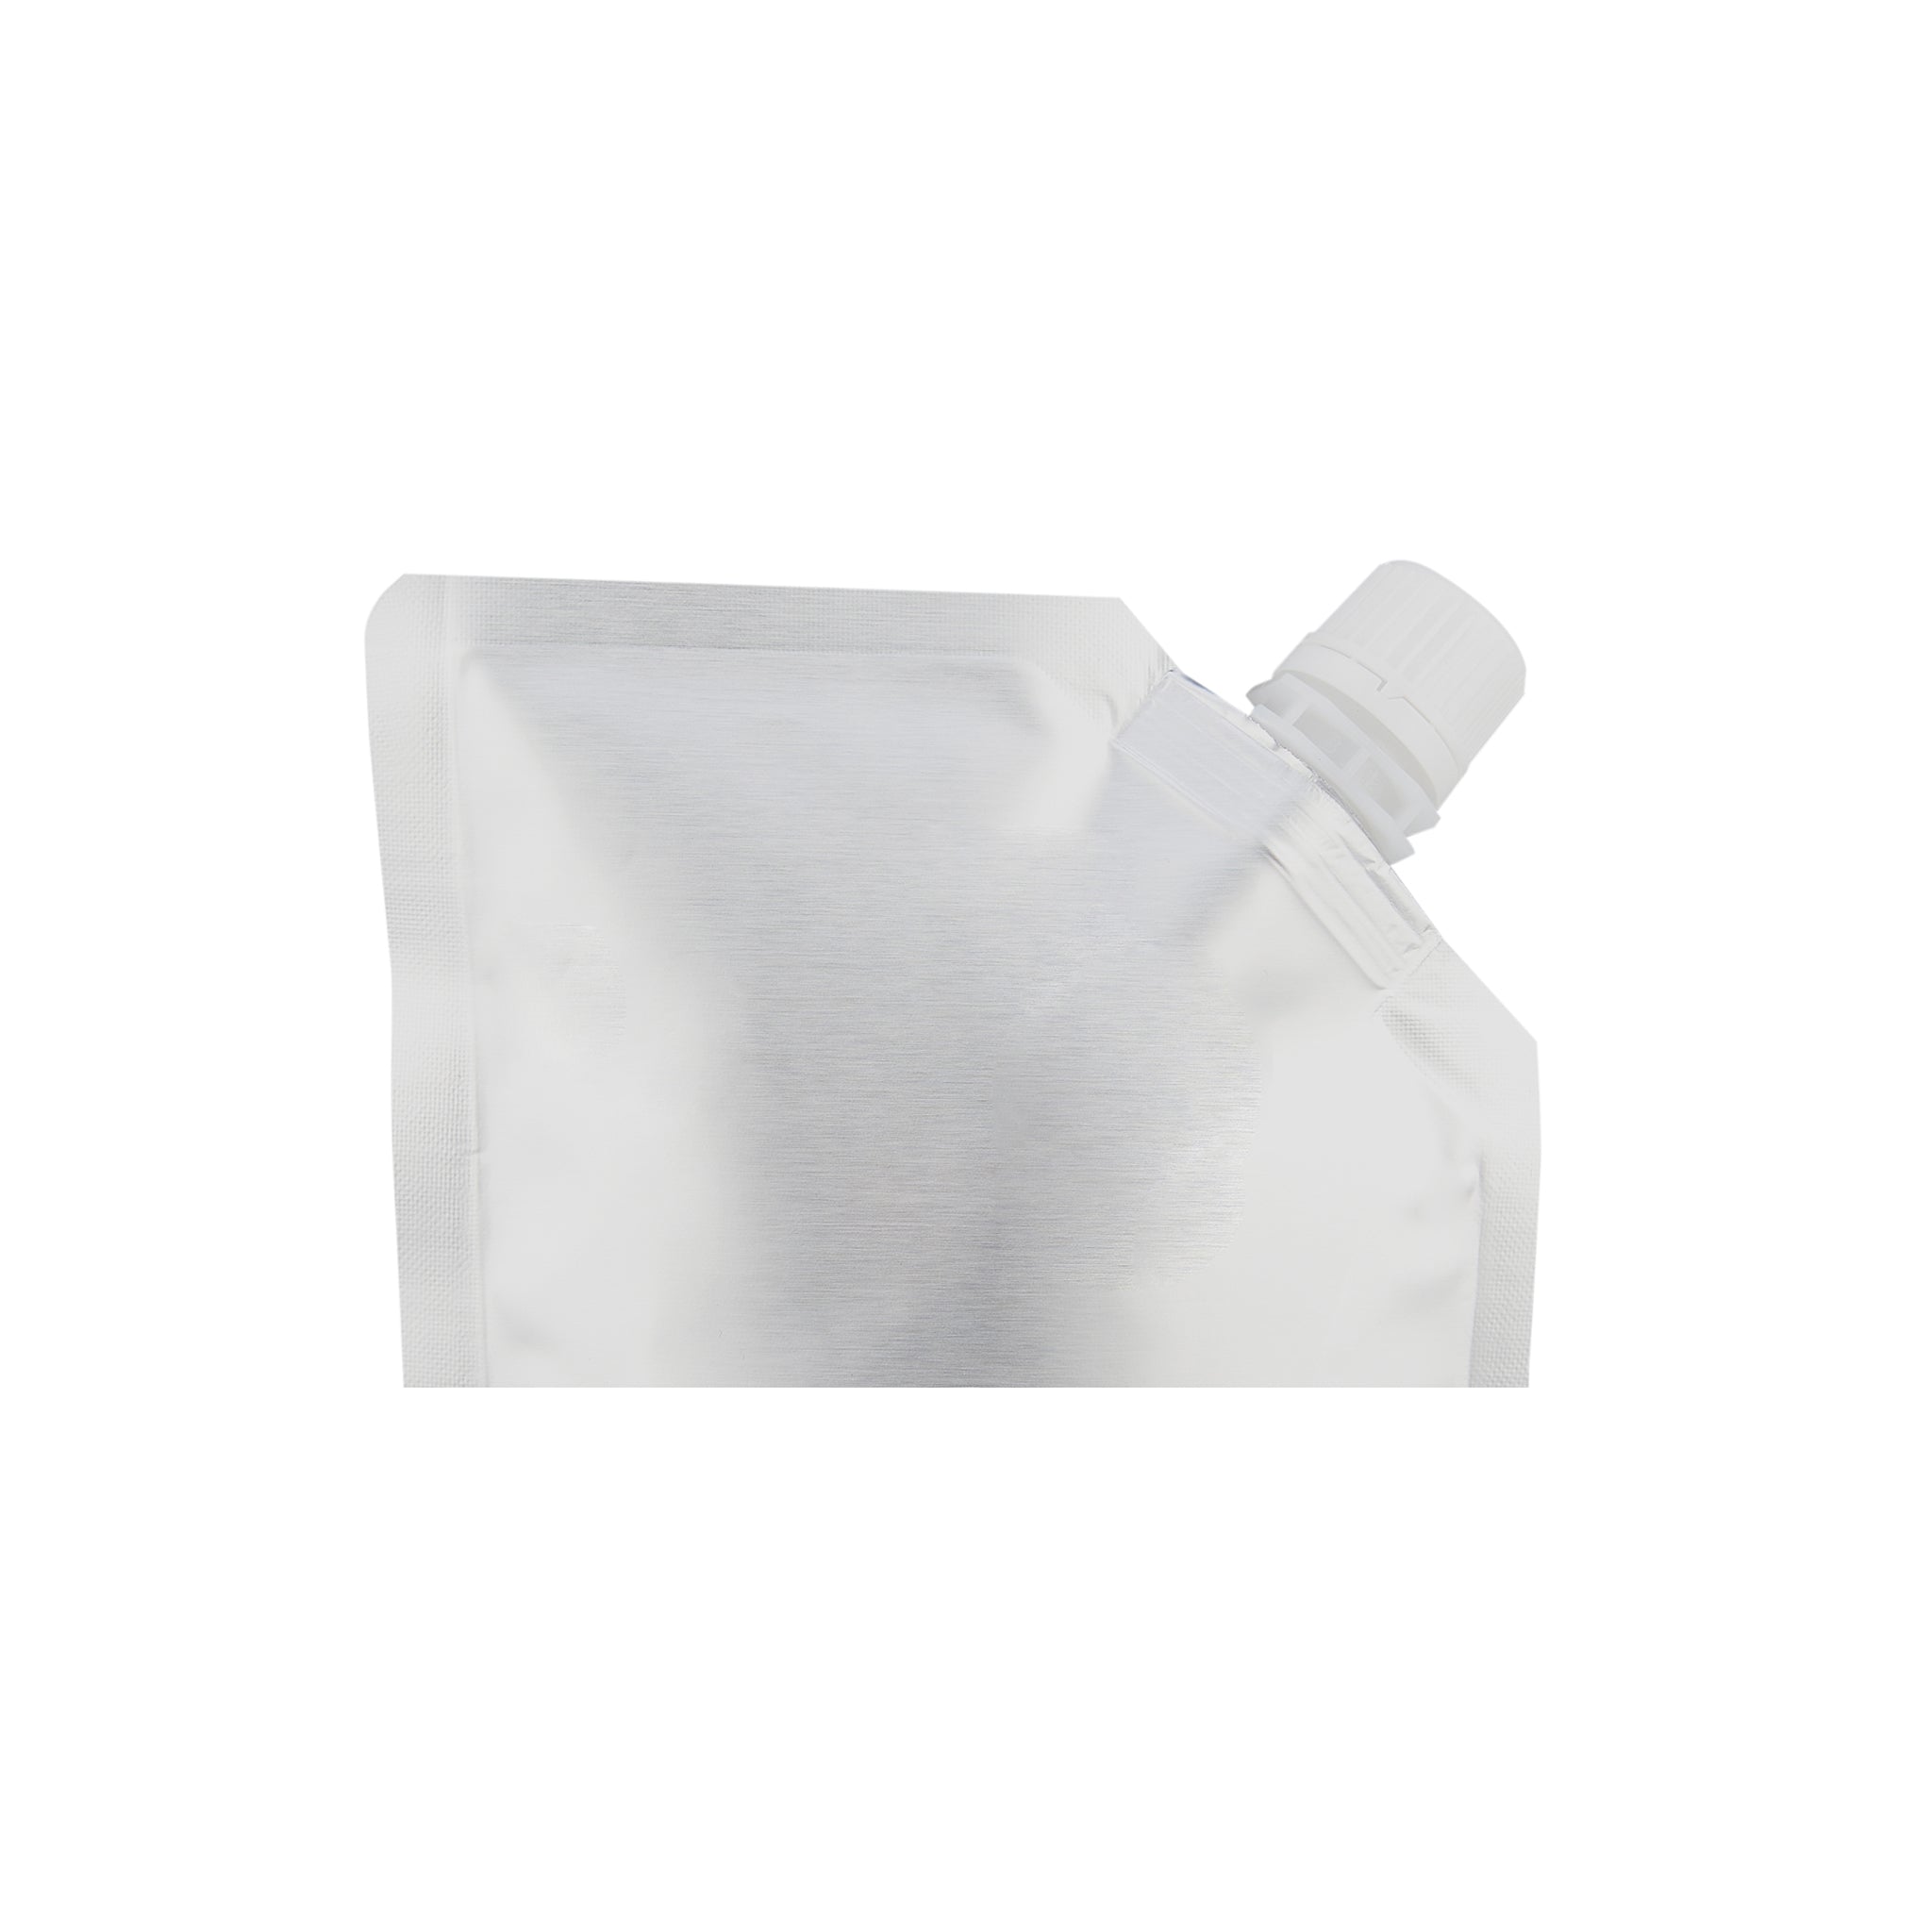 Coffee Bag Stand Up Spout Pouch - Hotpack Global